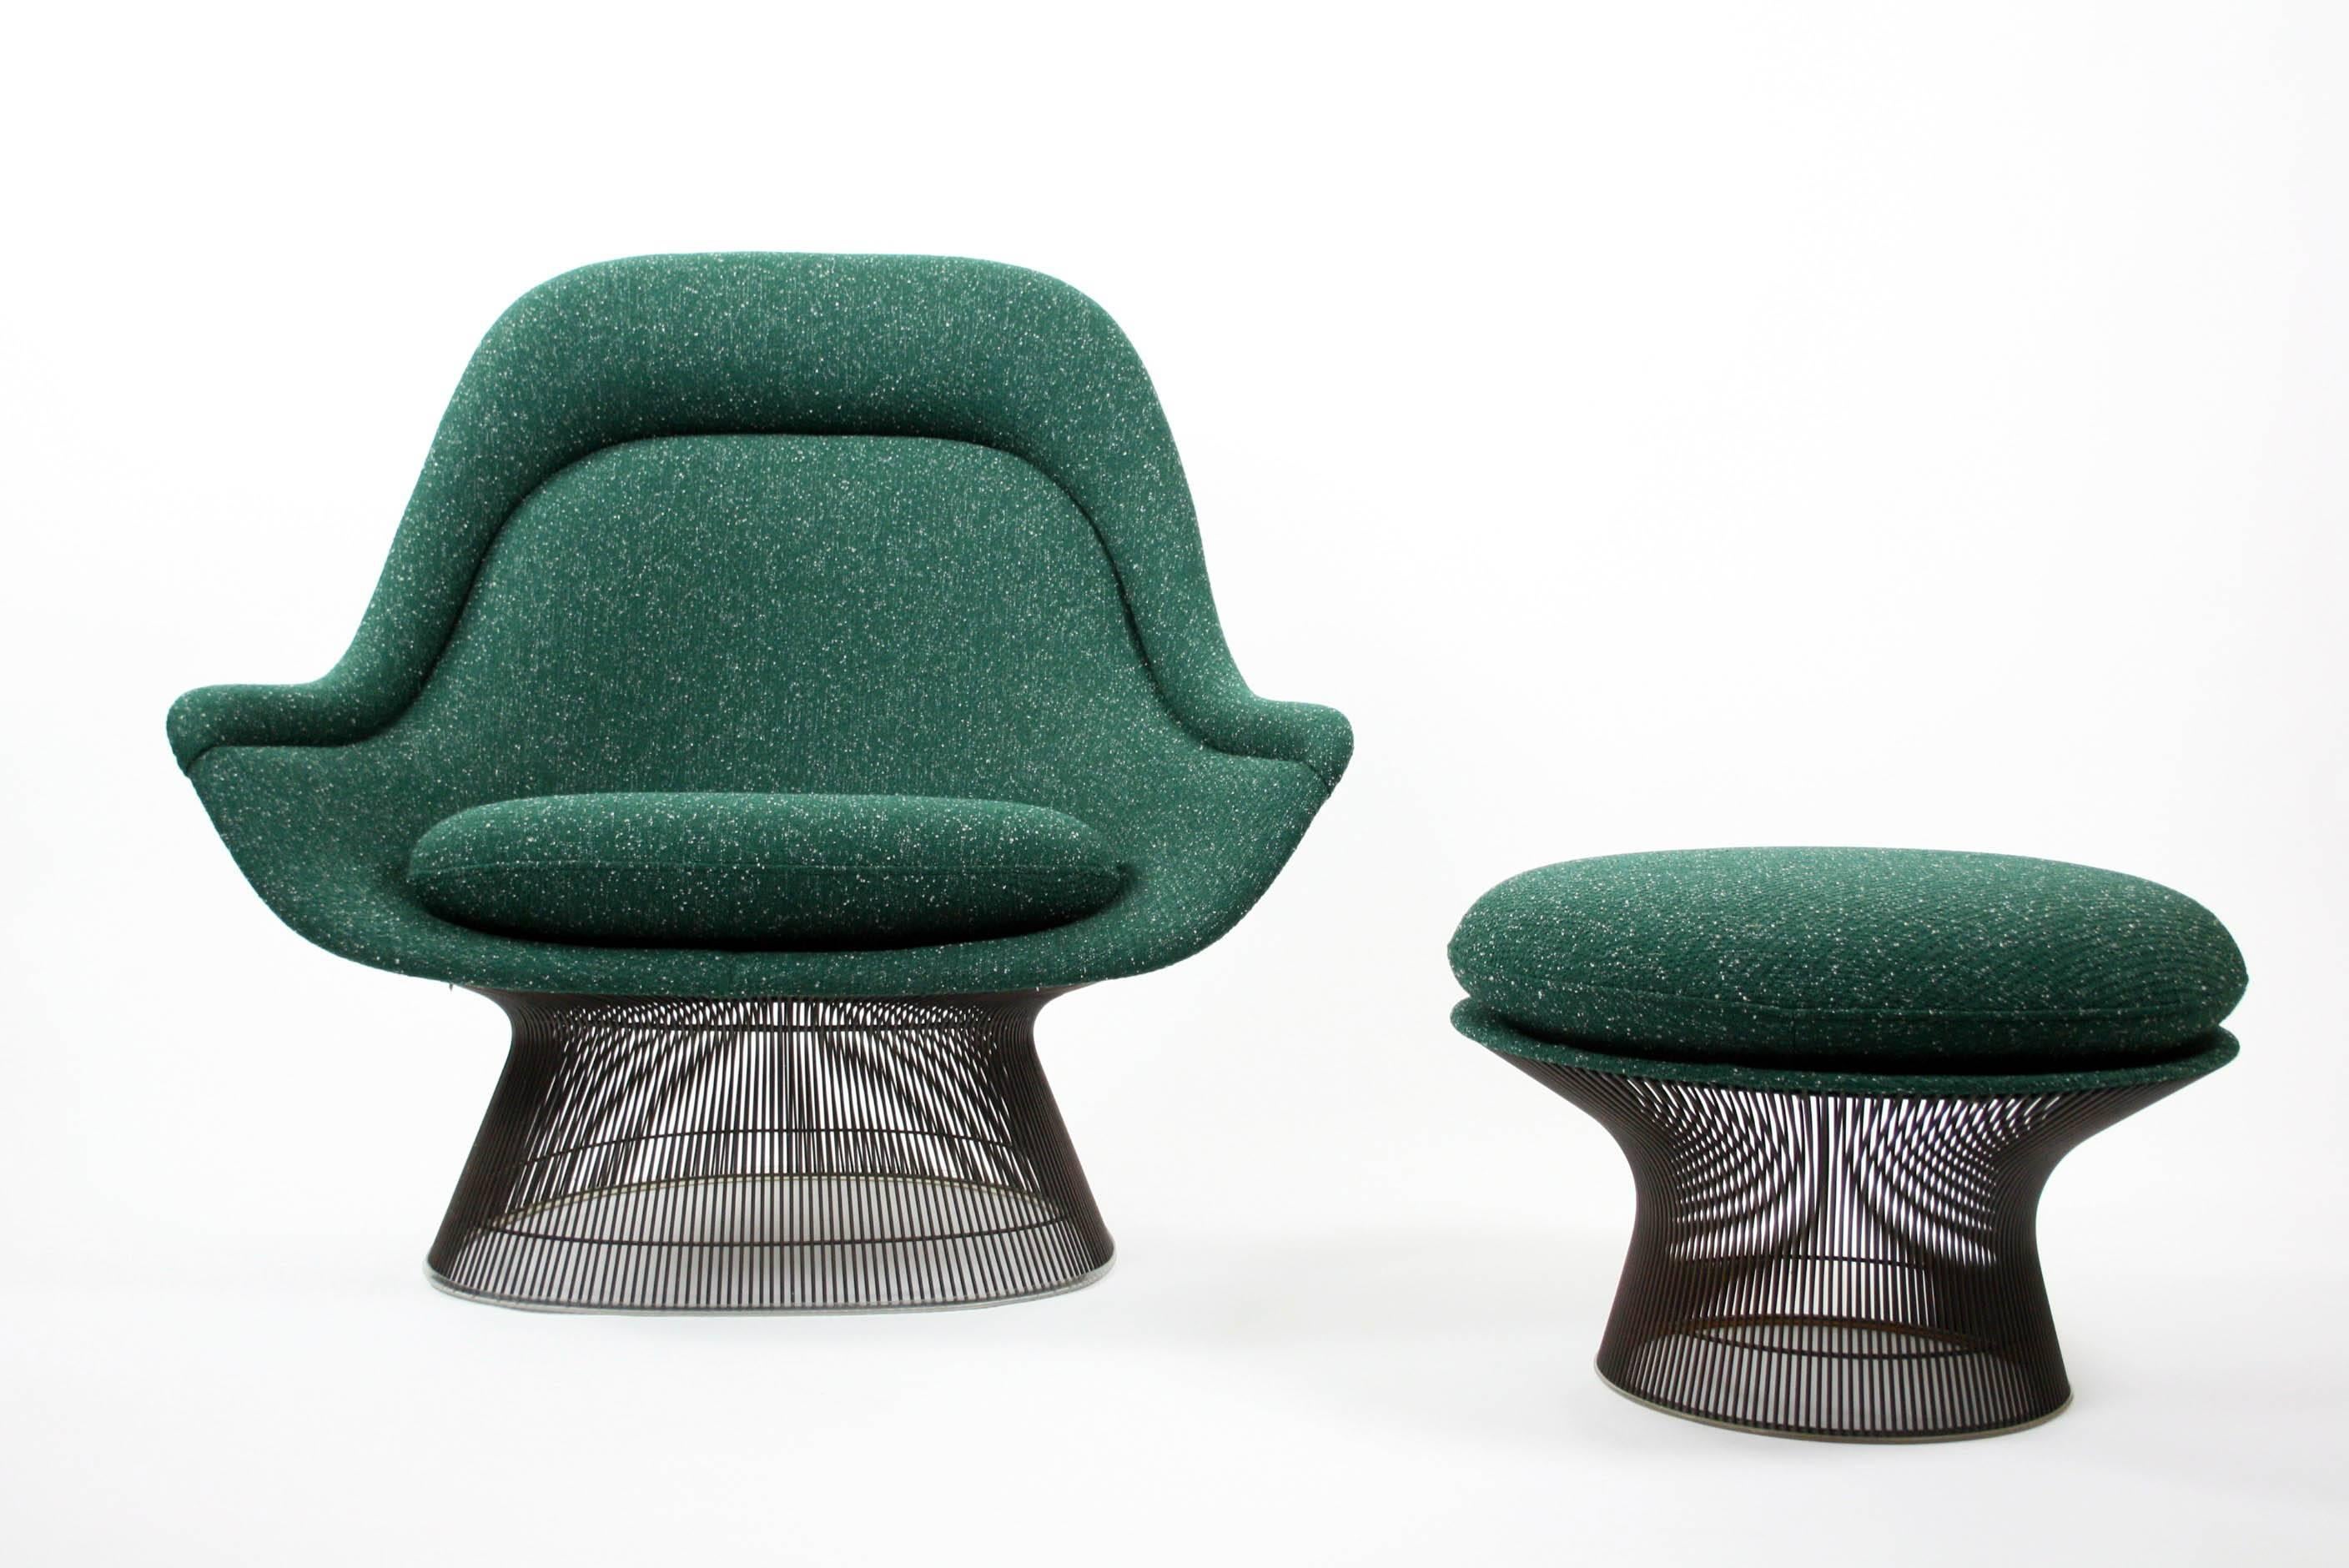 A fantastic oversize original vintage lounge chair and ottoman designed by Warren Platner for Knoll International. This amazing set comes completely professionally redone in a very high end emerald green fabric. The bronze finish wire frame shows